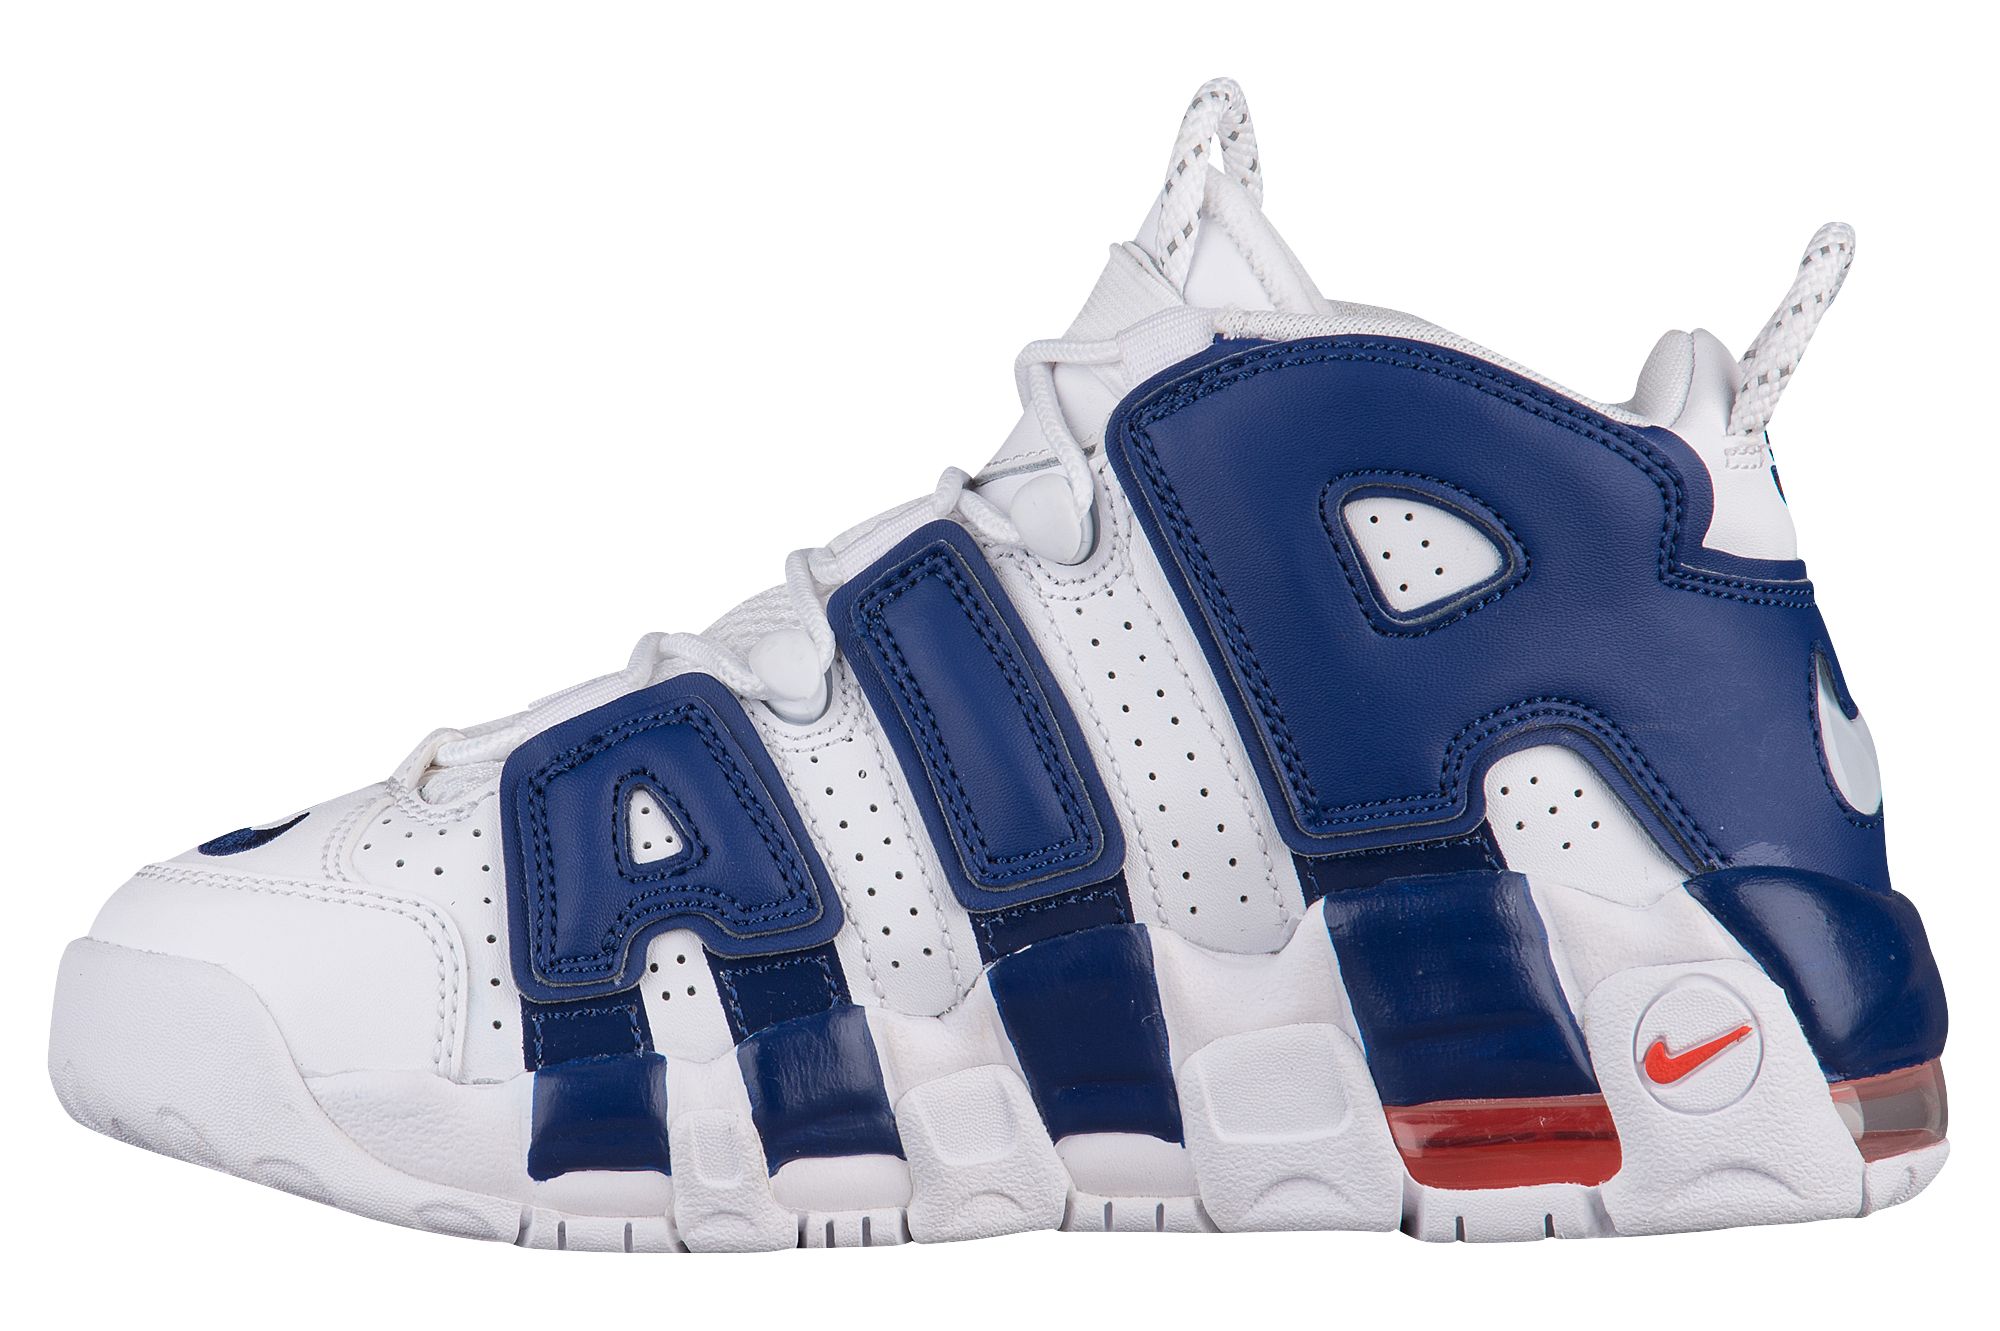 A Confusing 'Knicks' Nike Air More Uptempo Surfaces - WearTesters